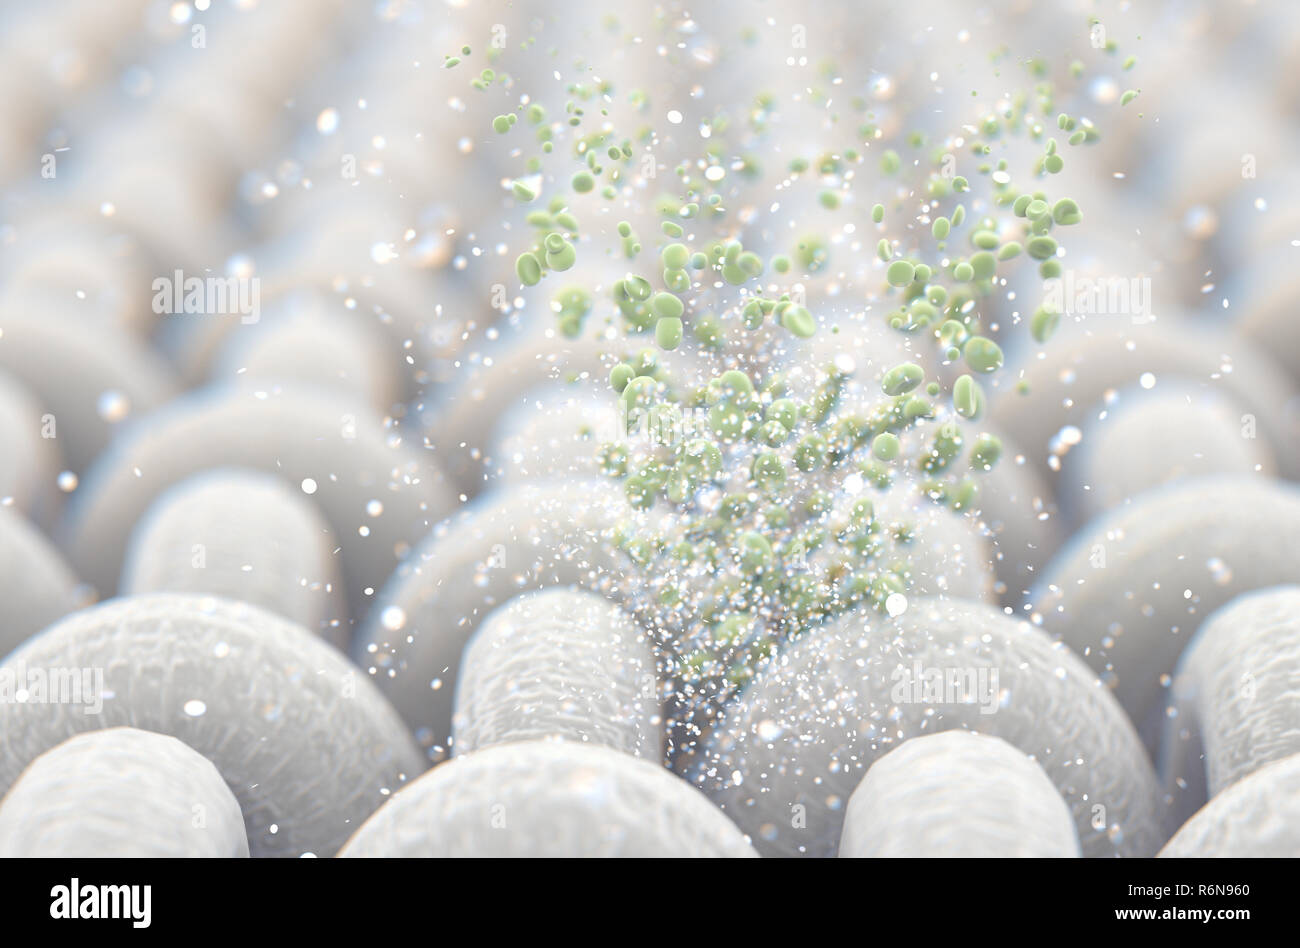 A microscopic close up view of a simple woven textile and a visible green particles  - 3D render Stock Photo